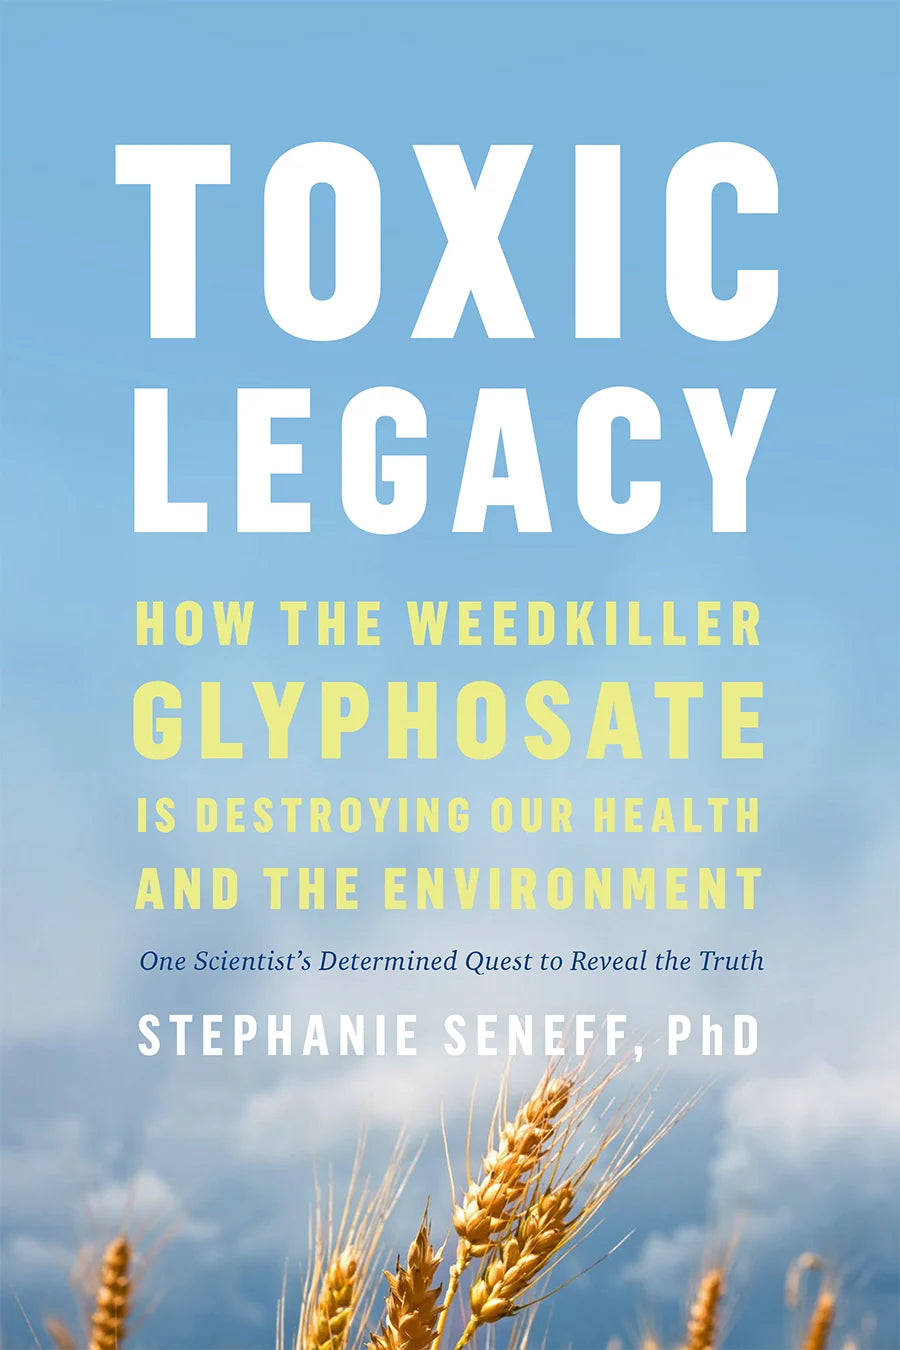 Toxic Legacy  How the Weedkiller Glyphosate Is Destroying Our Health and the Environment by Stephanie Seneff